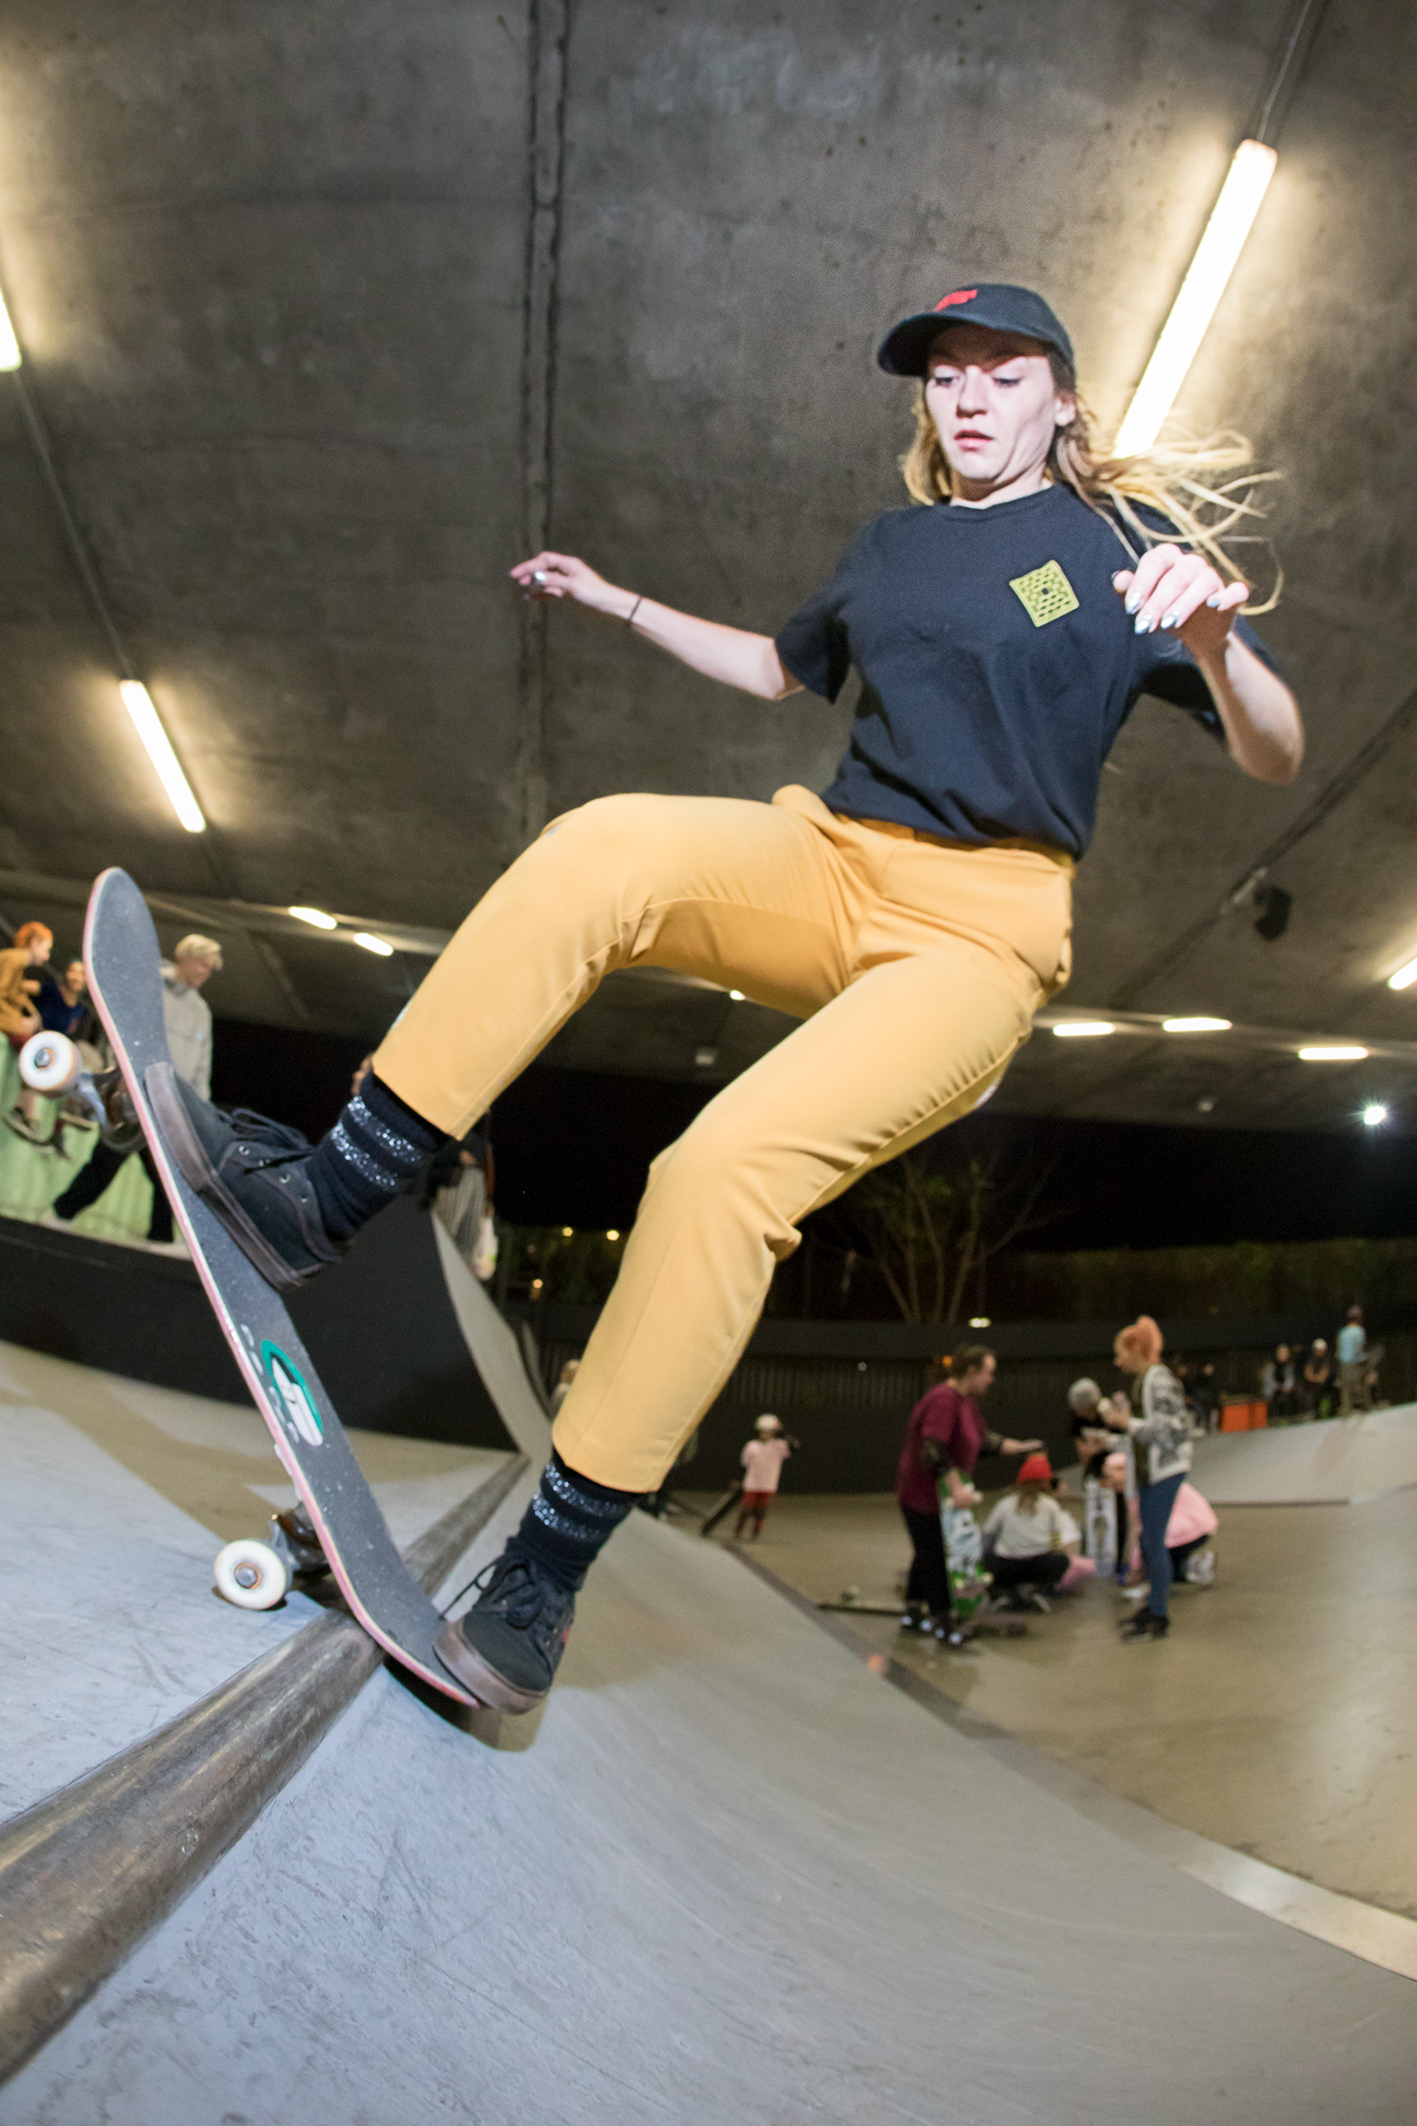 These Are The Real Female Skaters Of The UK - Cooler